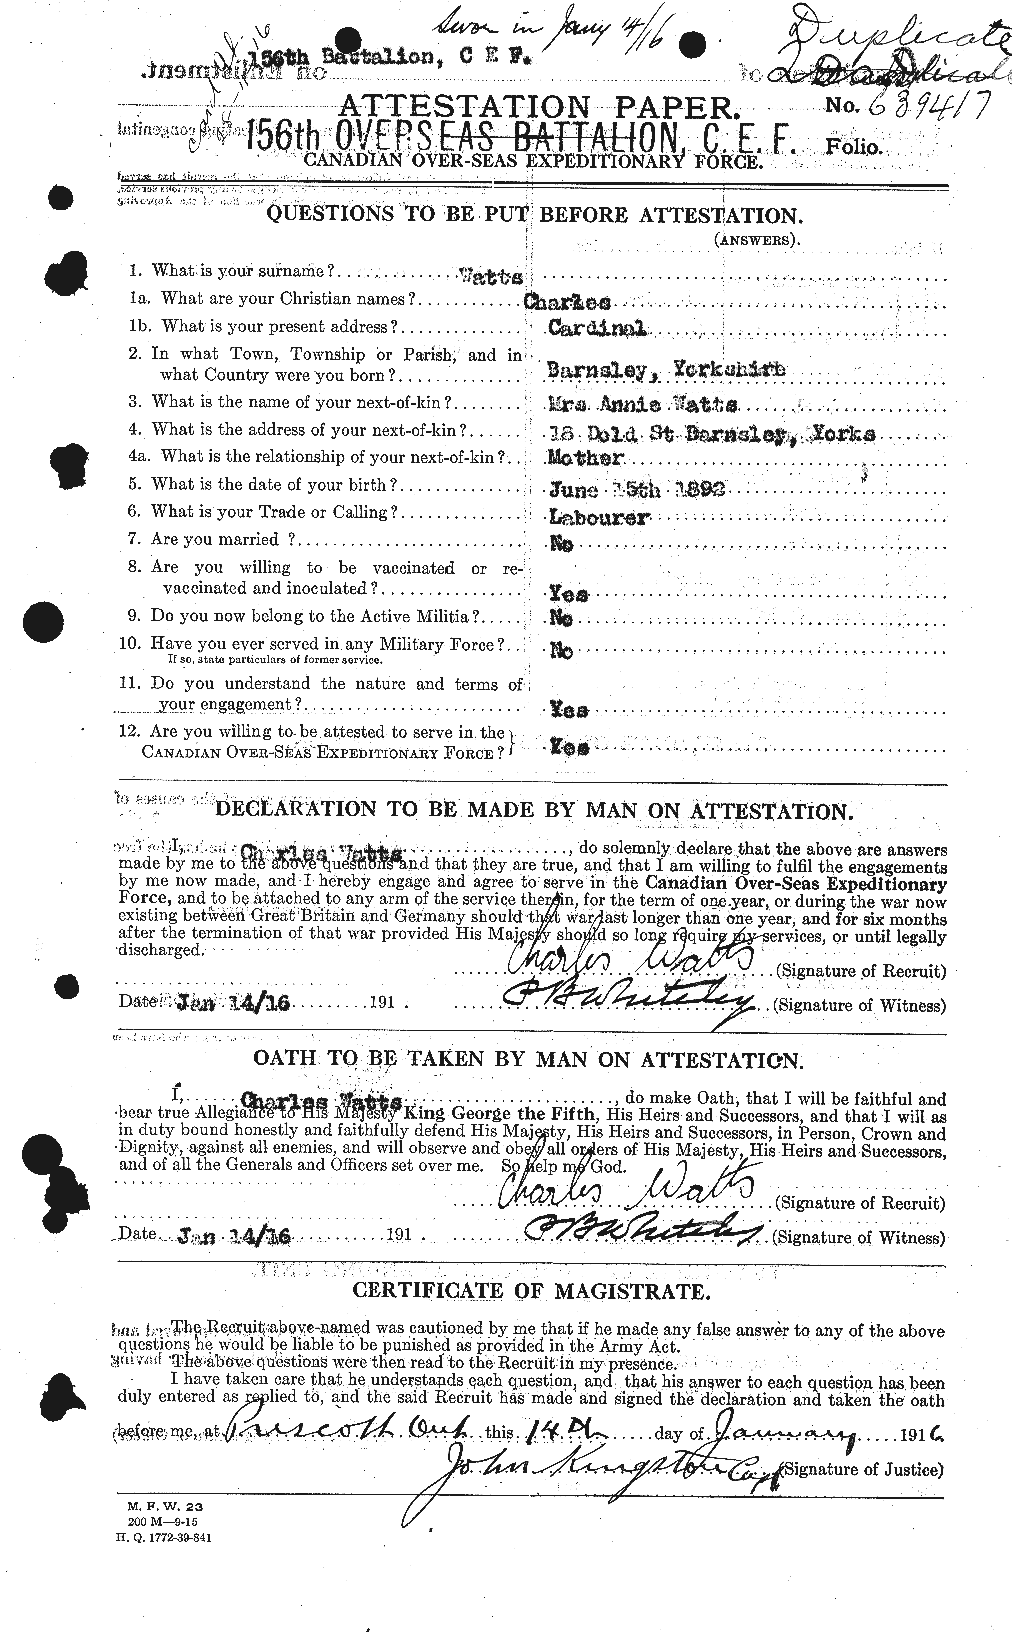 Personnel Records of the First World War - CEF 662713a